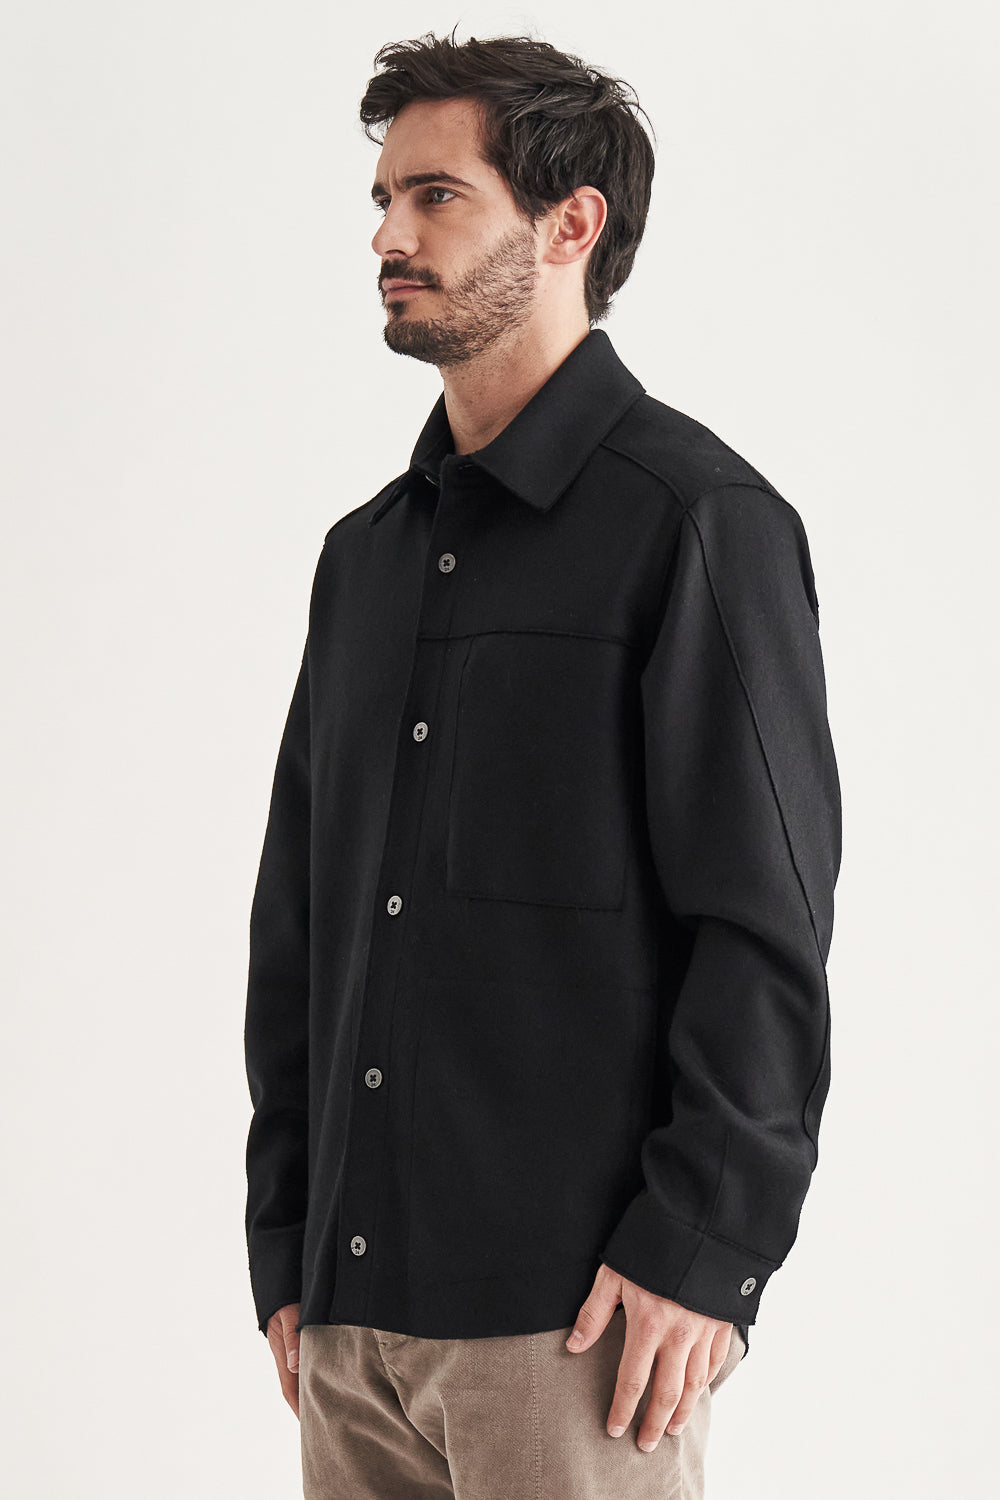 Buy the Transit Virgin Wool Overshirt in Black at Intro. Spend £50 for free UK delivery. Official stockists. We ship worldwide.